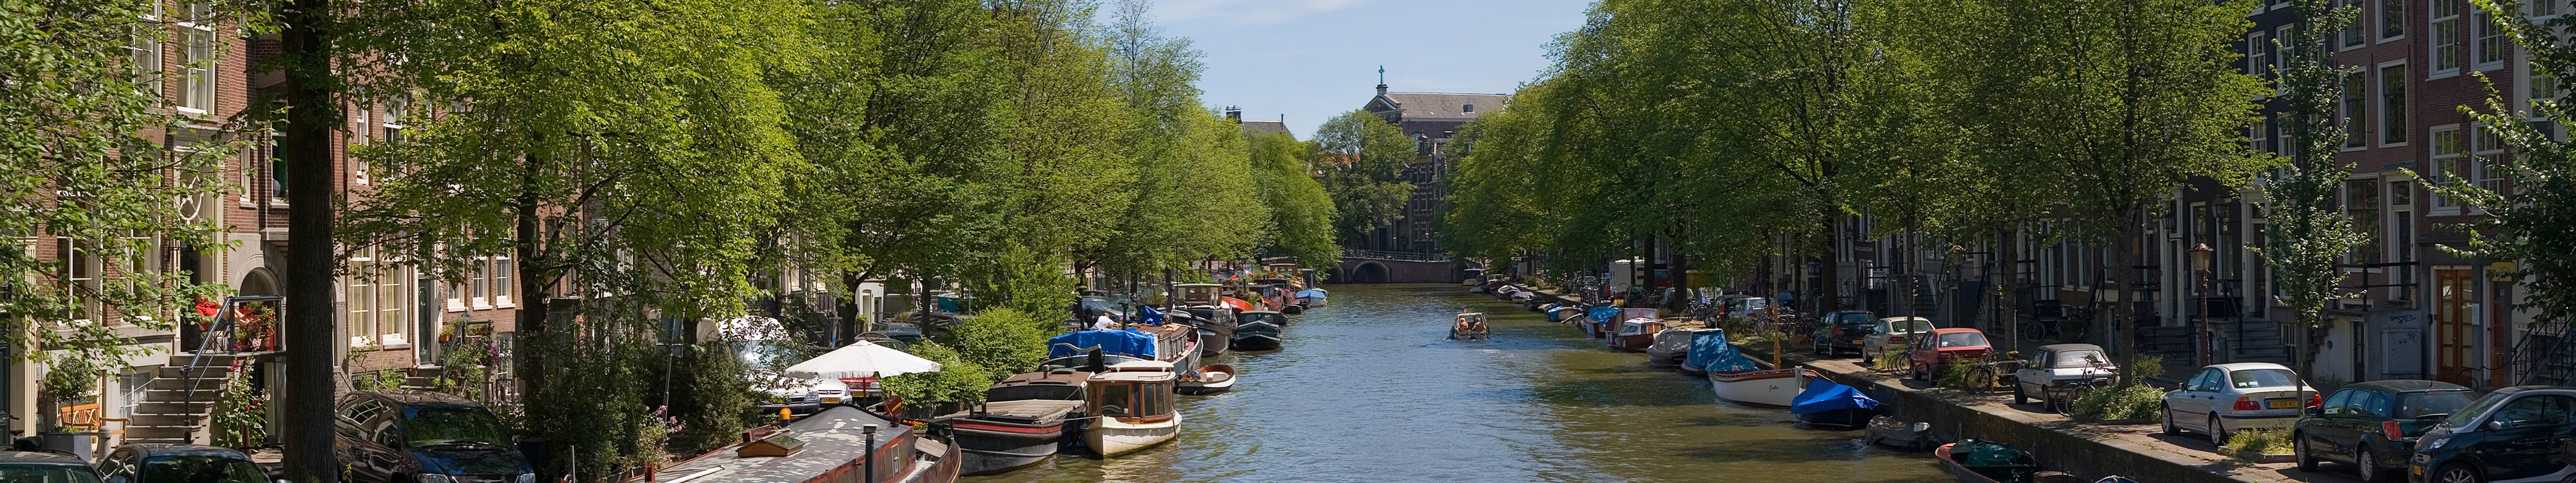 Amsterdam, Netherlands, Dutch, Boat, Canal, Water, Trees, Summer, Nature, City, Europe, Panorama Wallpaper